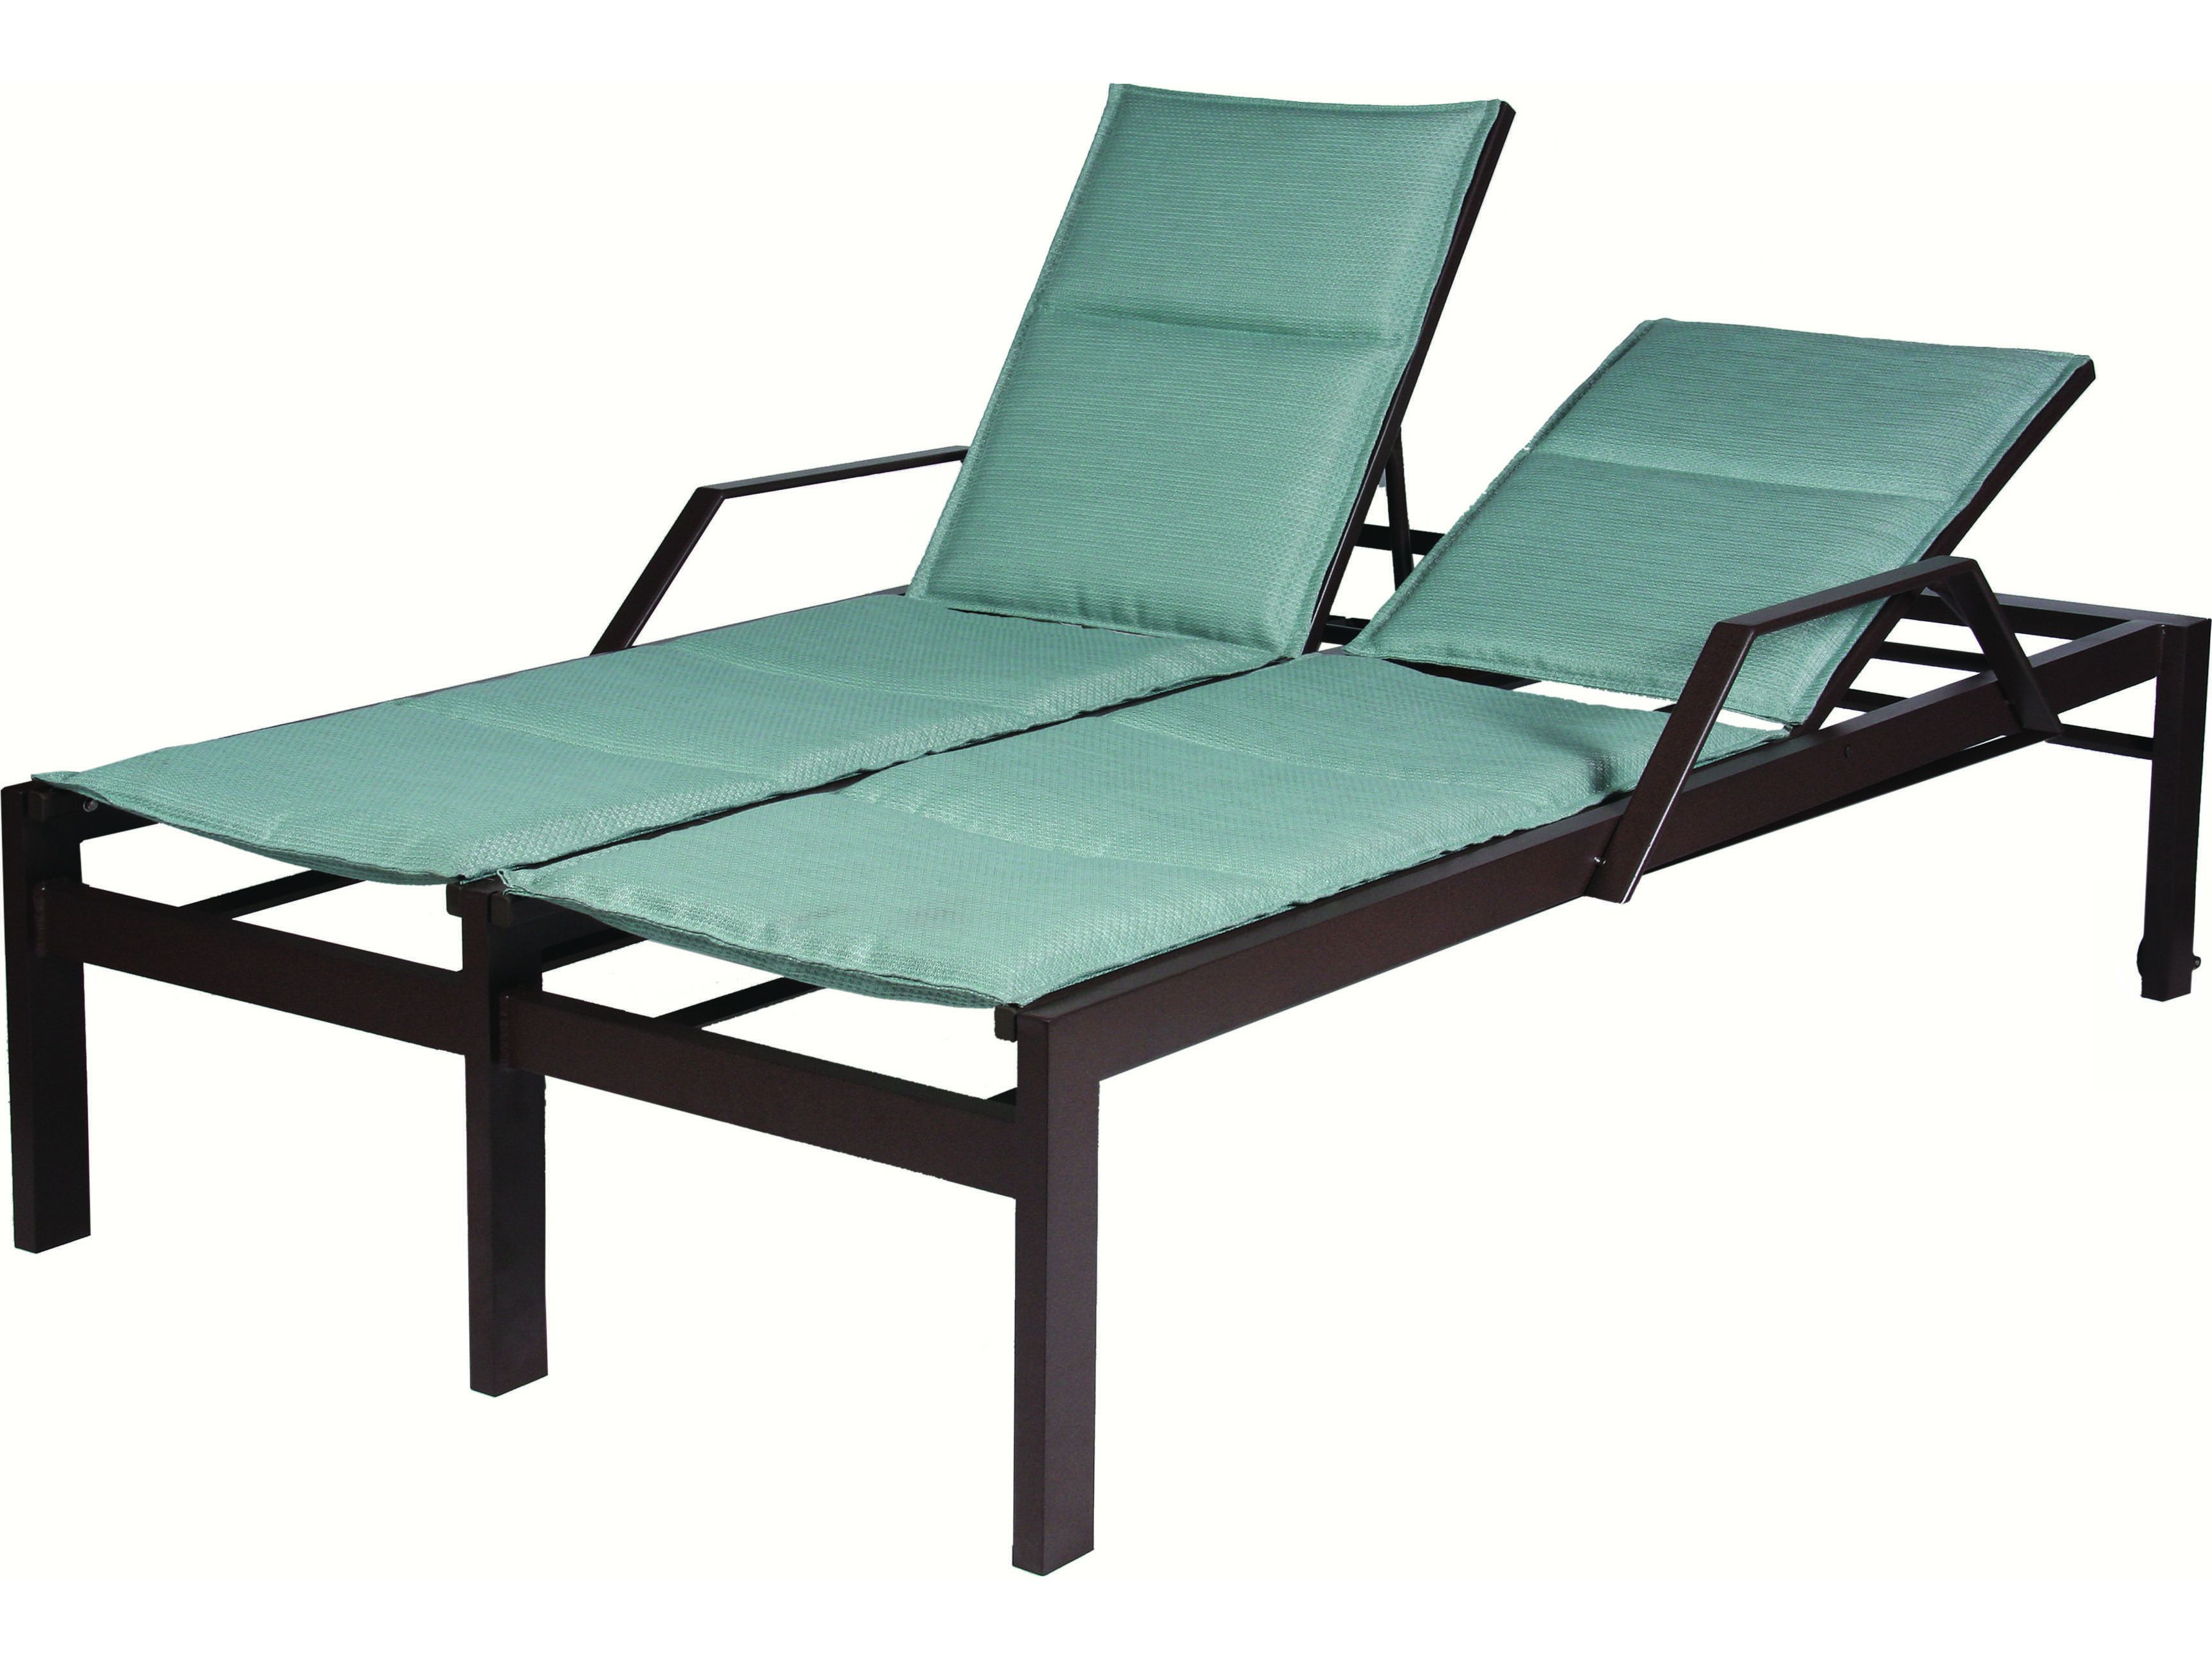 Widely Used Cart Wheel Adjustable Chaise Lounge Chairs Intended For Suncoast Vectra Bold Sling Cast Aluminum Double Chaise Lounge With Wheels (View 25 of 25)